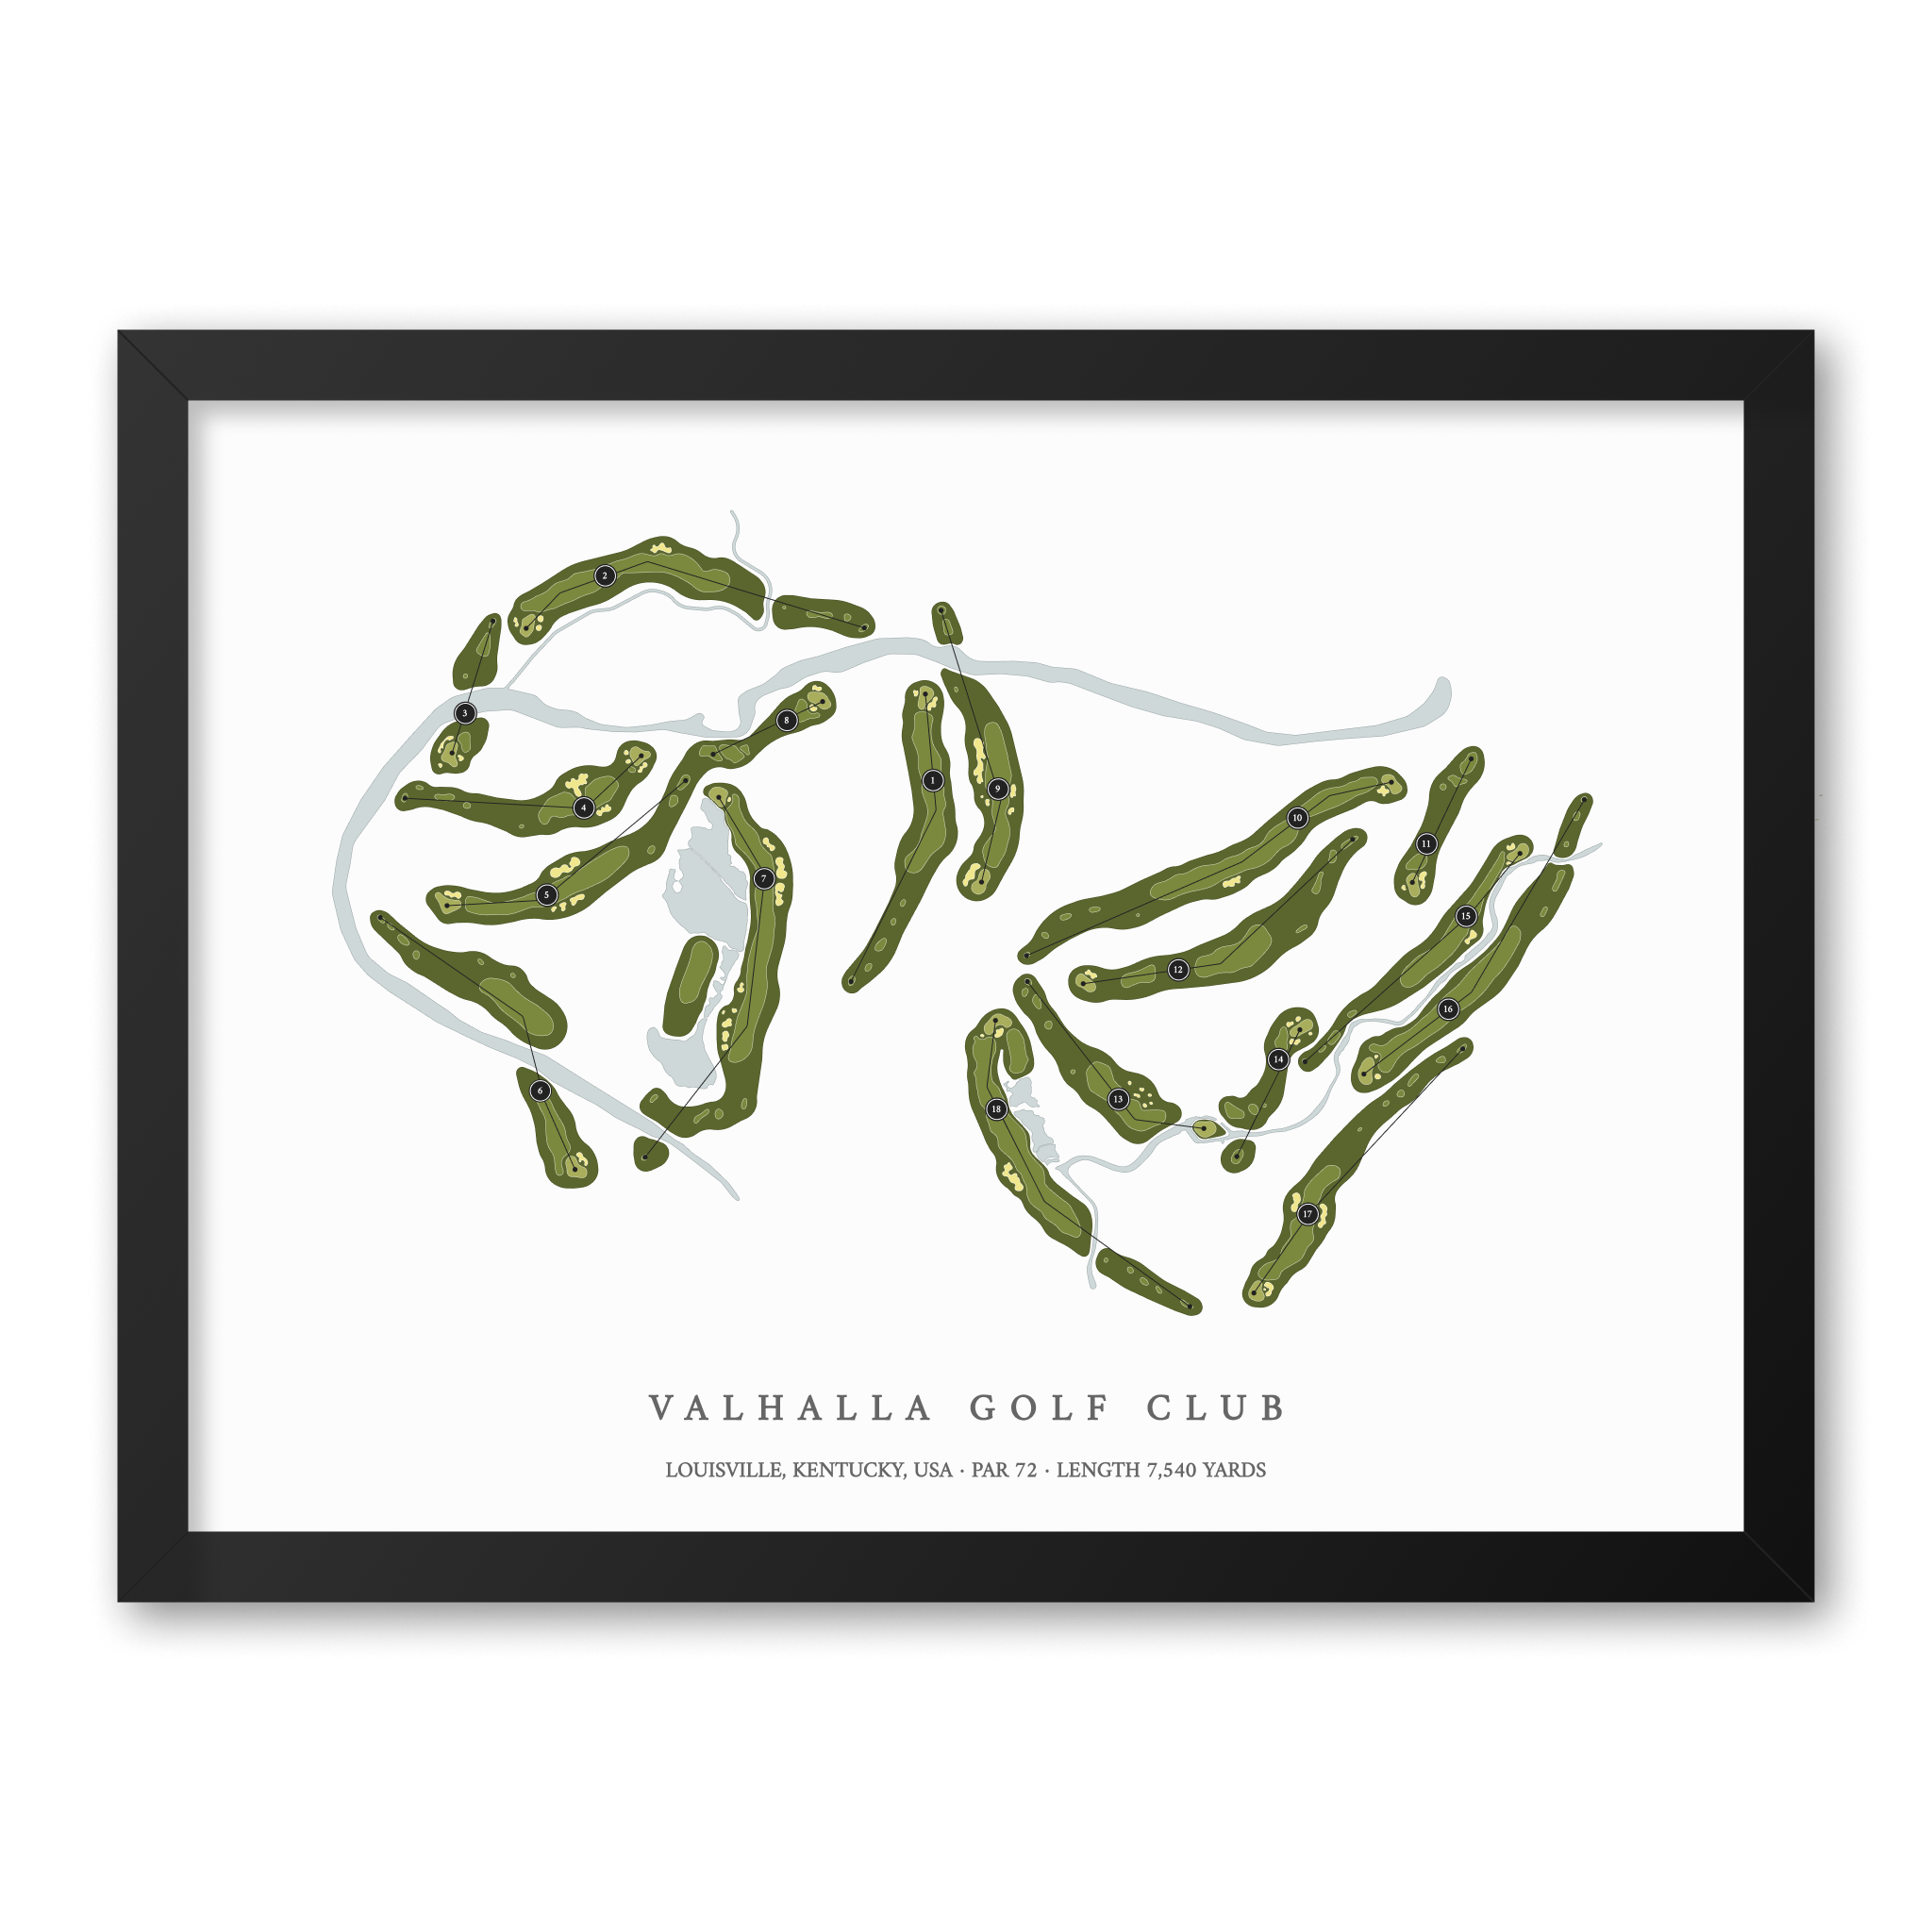 Valhalla Golf Club| Golf Course Print | Black Frame With Hole Numbers #hole numbers_yes